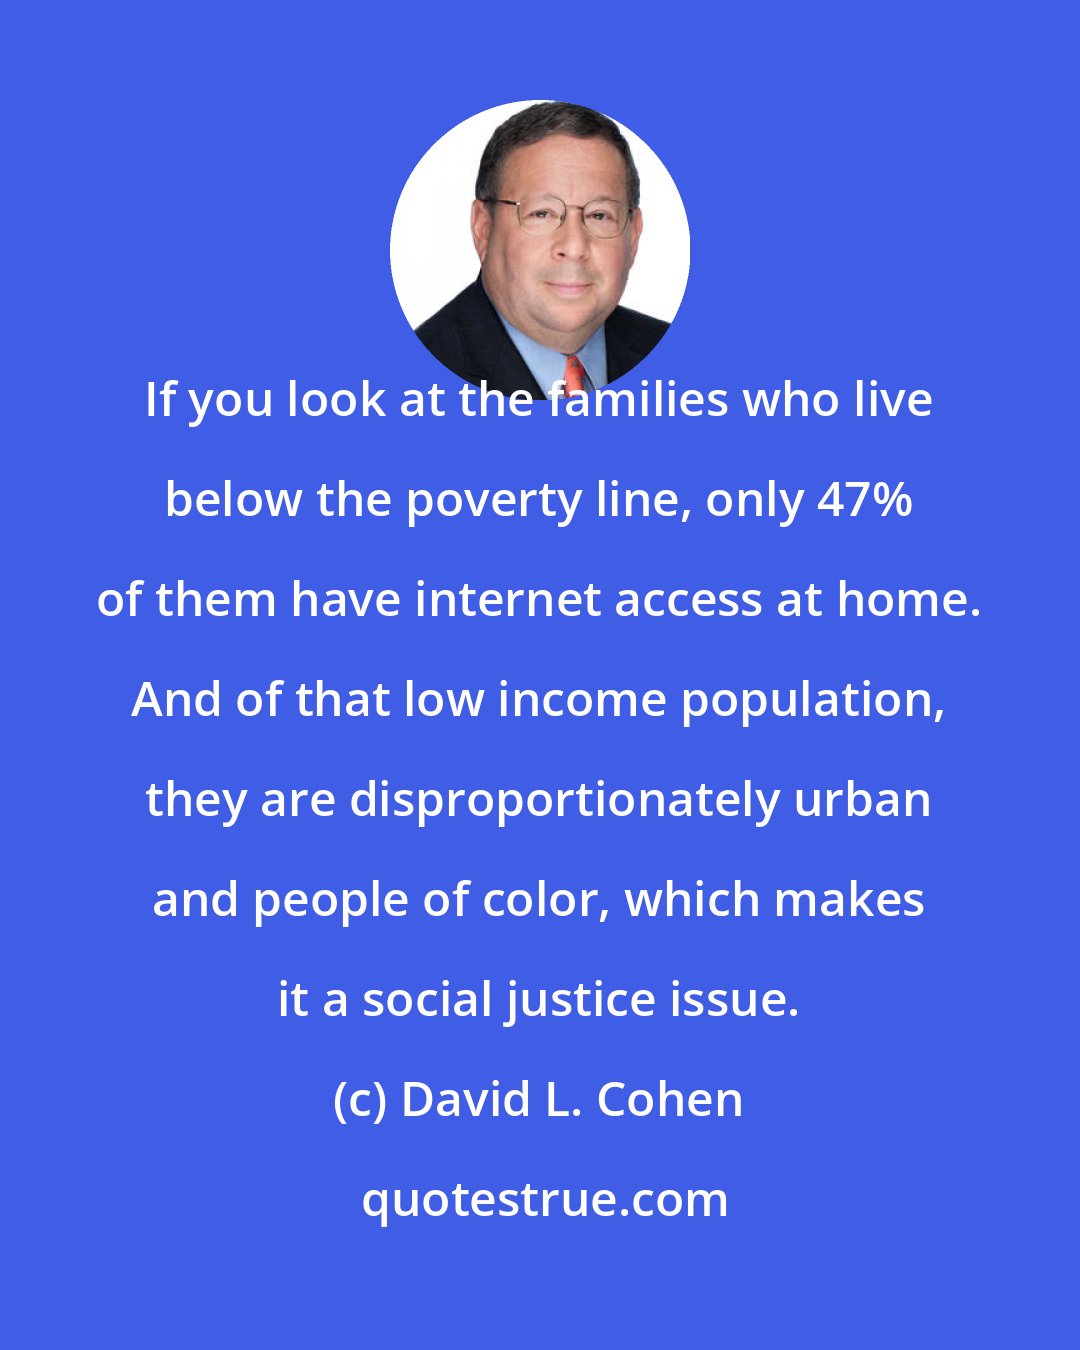 David L. Cohen: If you look at the families who live below the poverty line, only 47% of them have internet access at home. And of that low income population, they are disproportionately urban and people of color, which makes it a social justice issue.